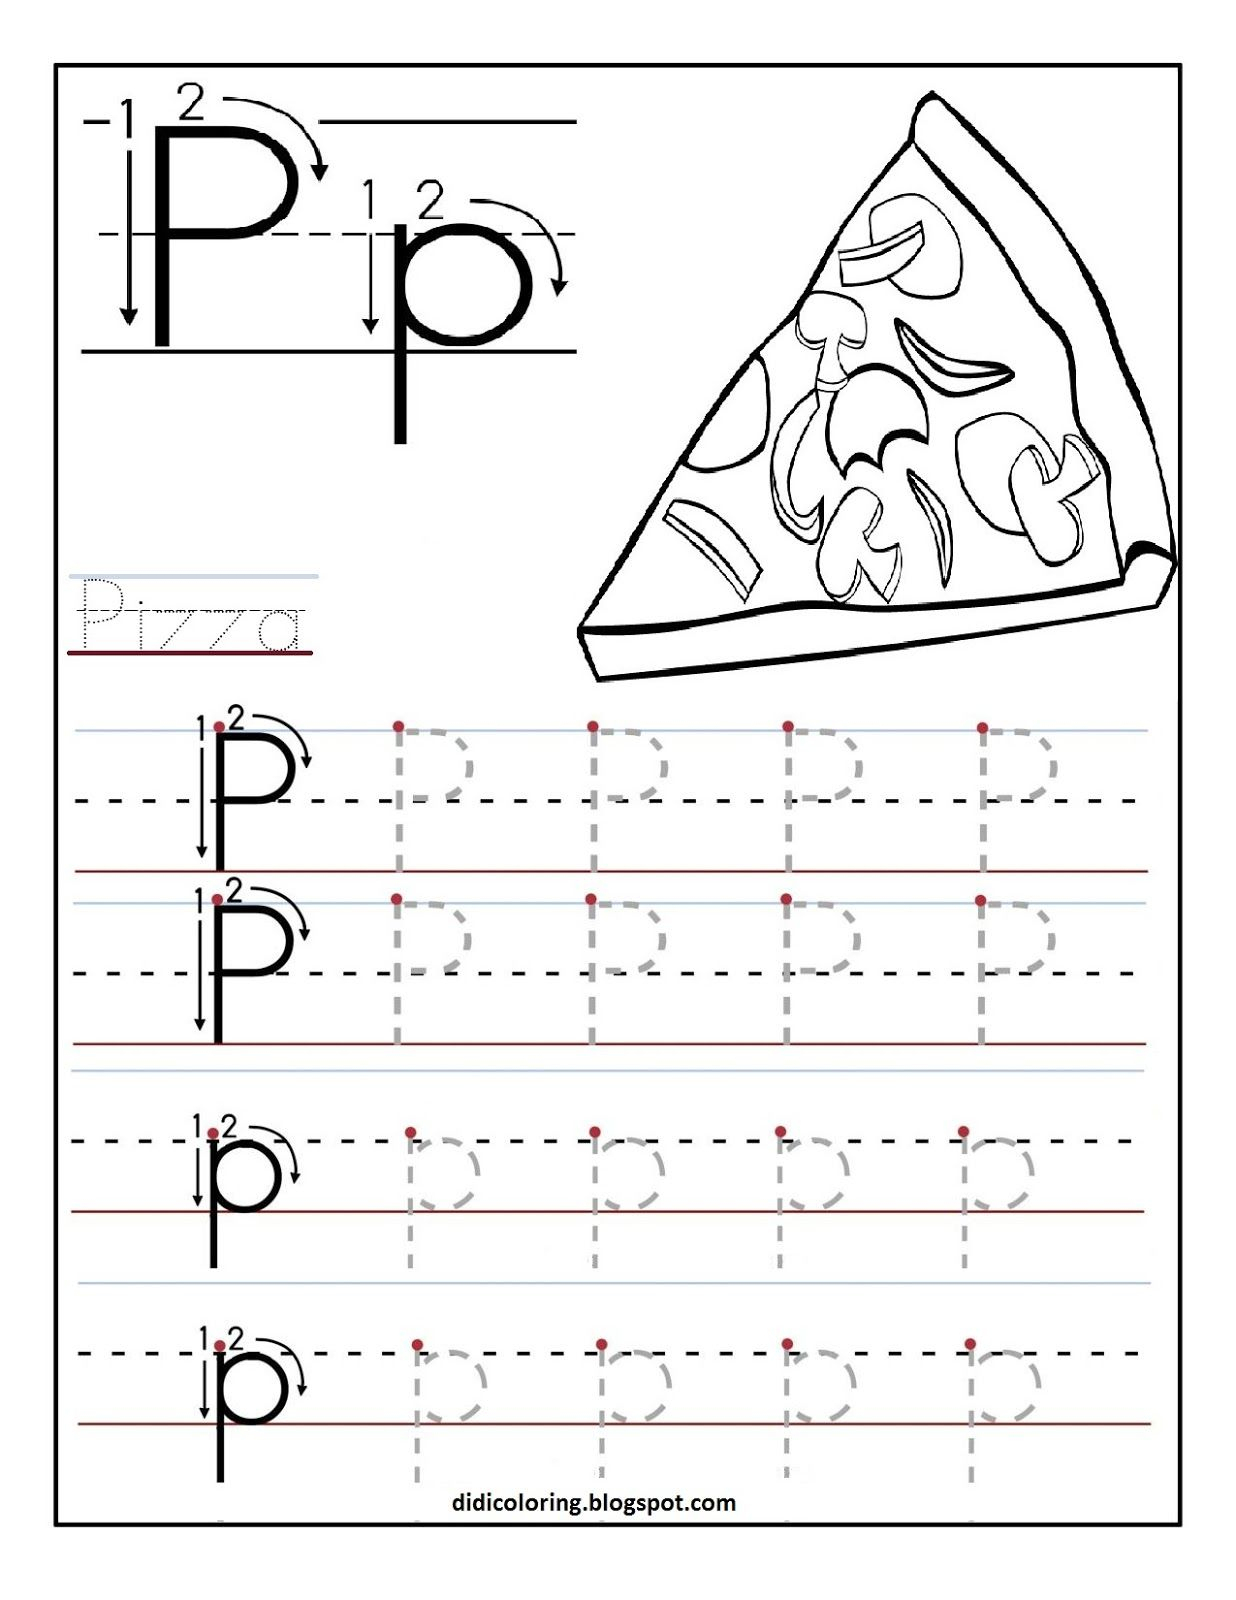 Free Printable Worksheet Letter P For Your Child To Learn And Write | Free Printable Letter P Worksheets